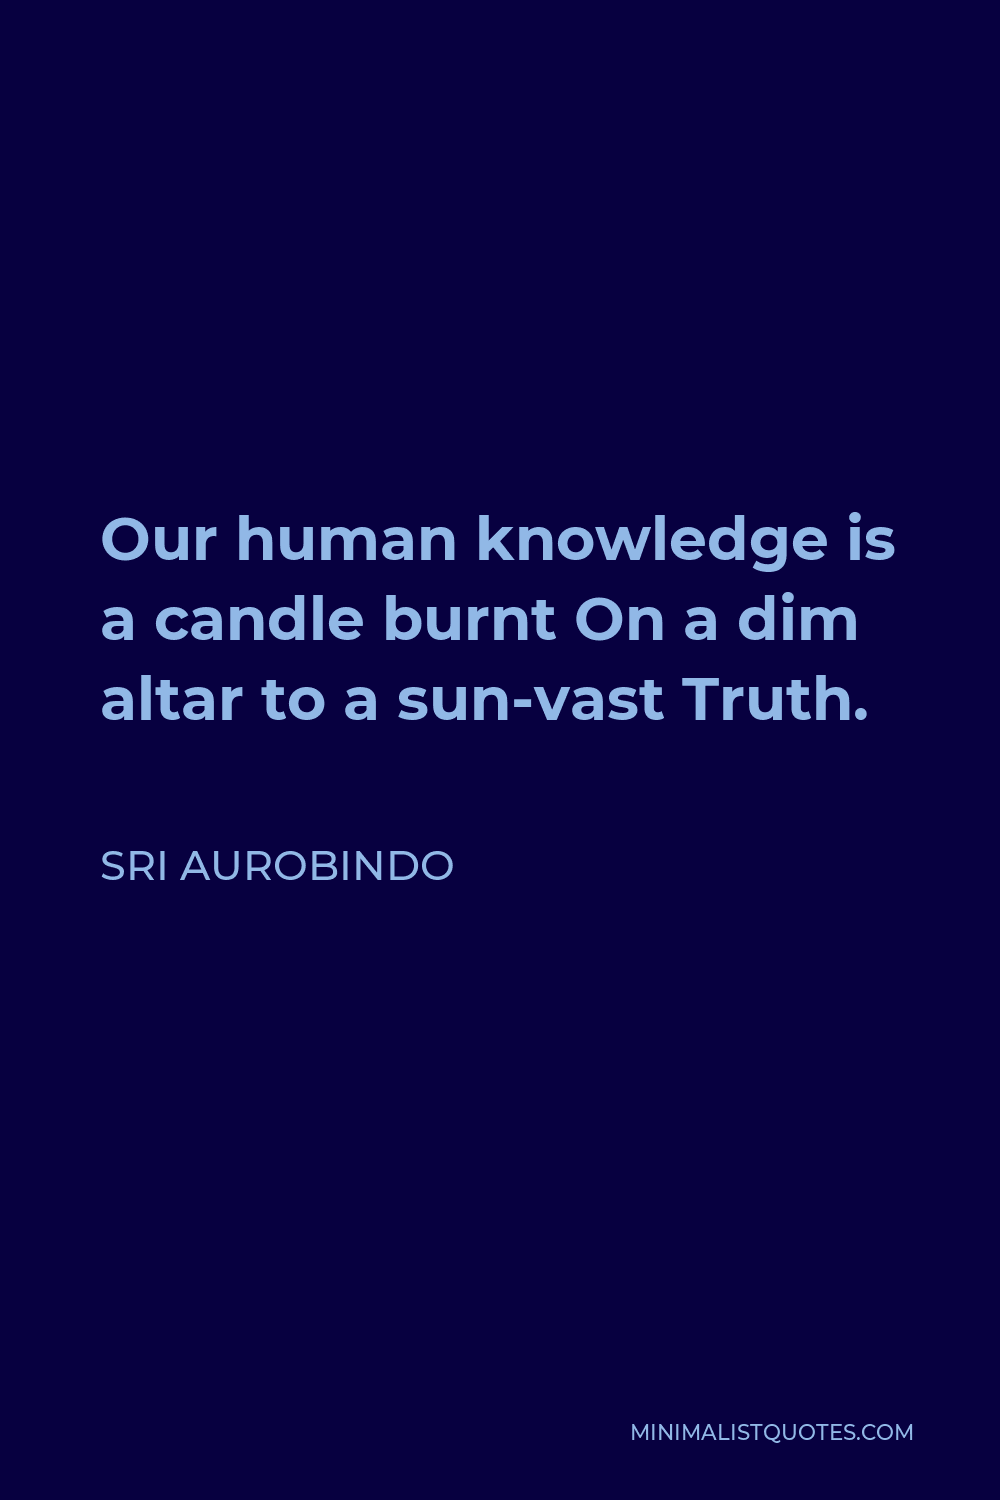 Sri Aurobindo Quote - Our human knowledge is a candle burnt On a dim altar to a sun-vast Truth.